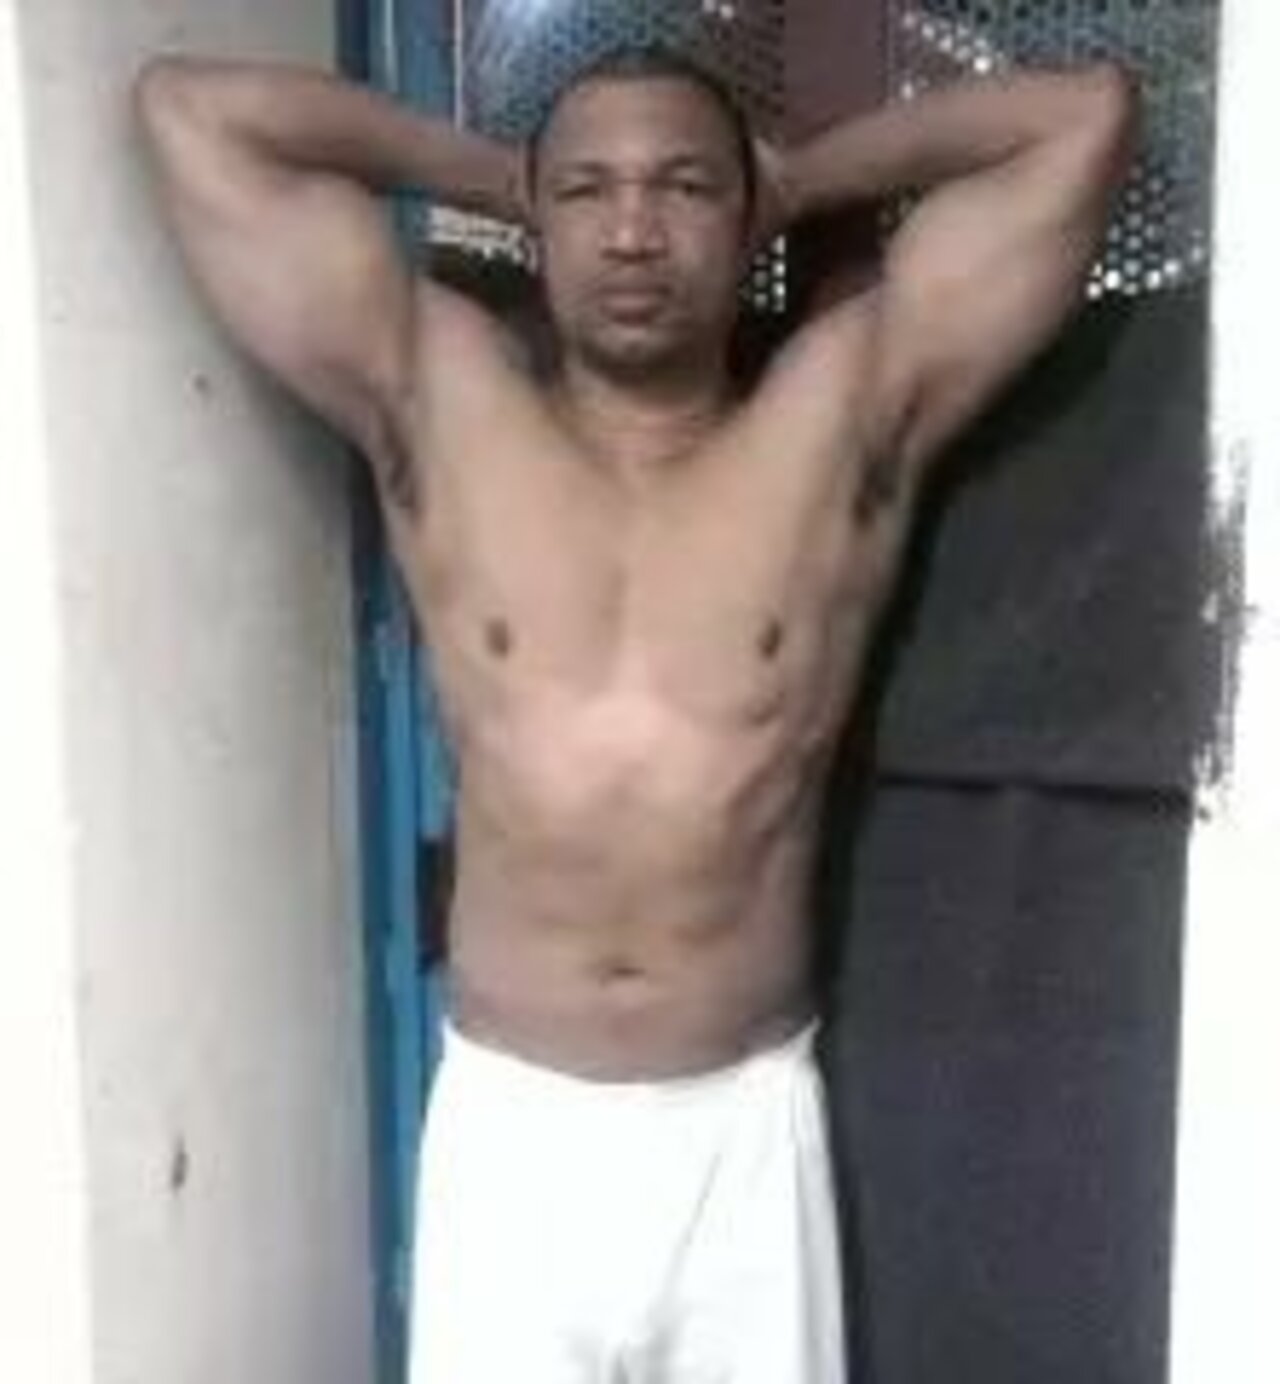 Prisoner-Artist, Donald "C-Note" Hooker, Says Stretching and Core Muscle Exercises are Key to High Octane Performances in the#PerformingArts #neojimcrowart #artsinprison #cut50 #rebelart #prisonart #prison #theater #spokenword #hiphop #acting #shakespeare #storytelling #writers https://t.co/madXhmr3UB